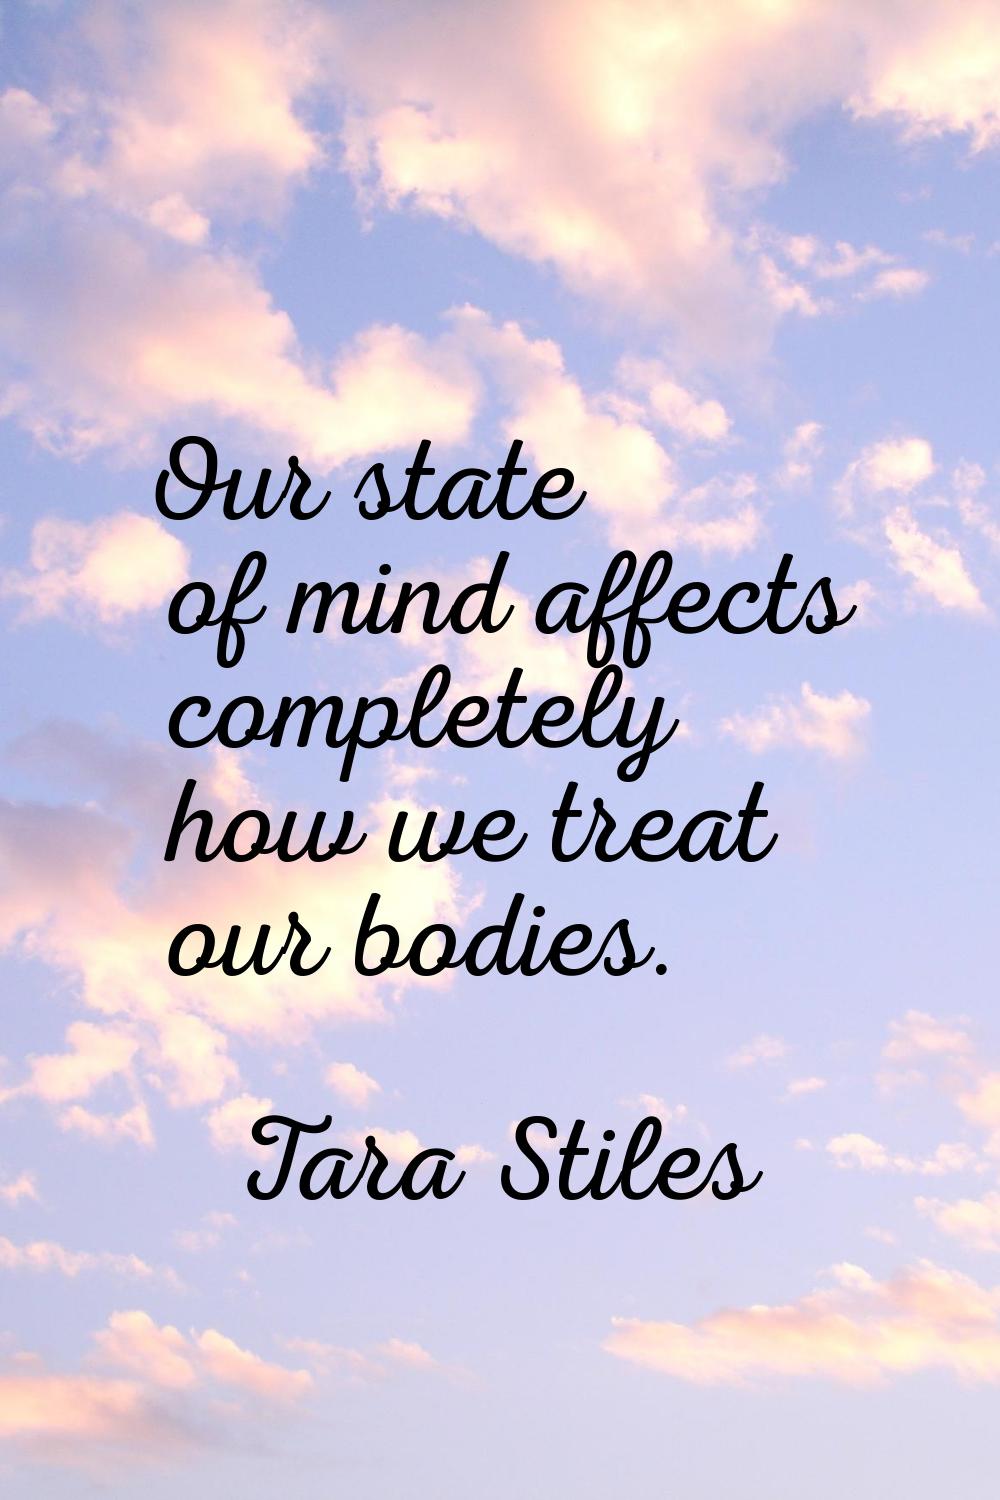 Our state of mind affects completely how we treat our bodies.